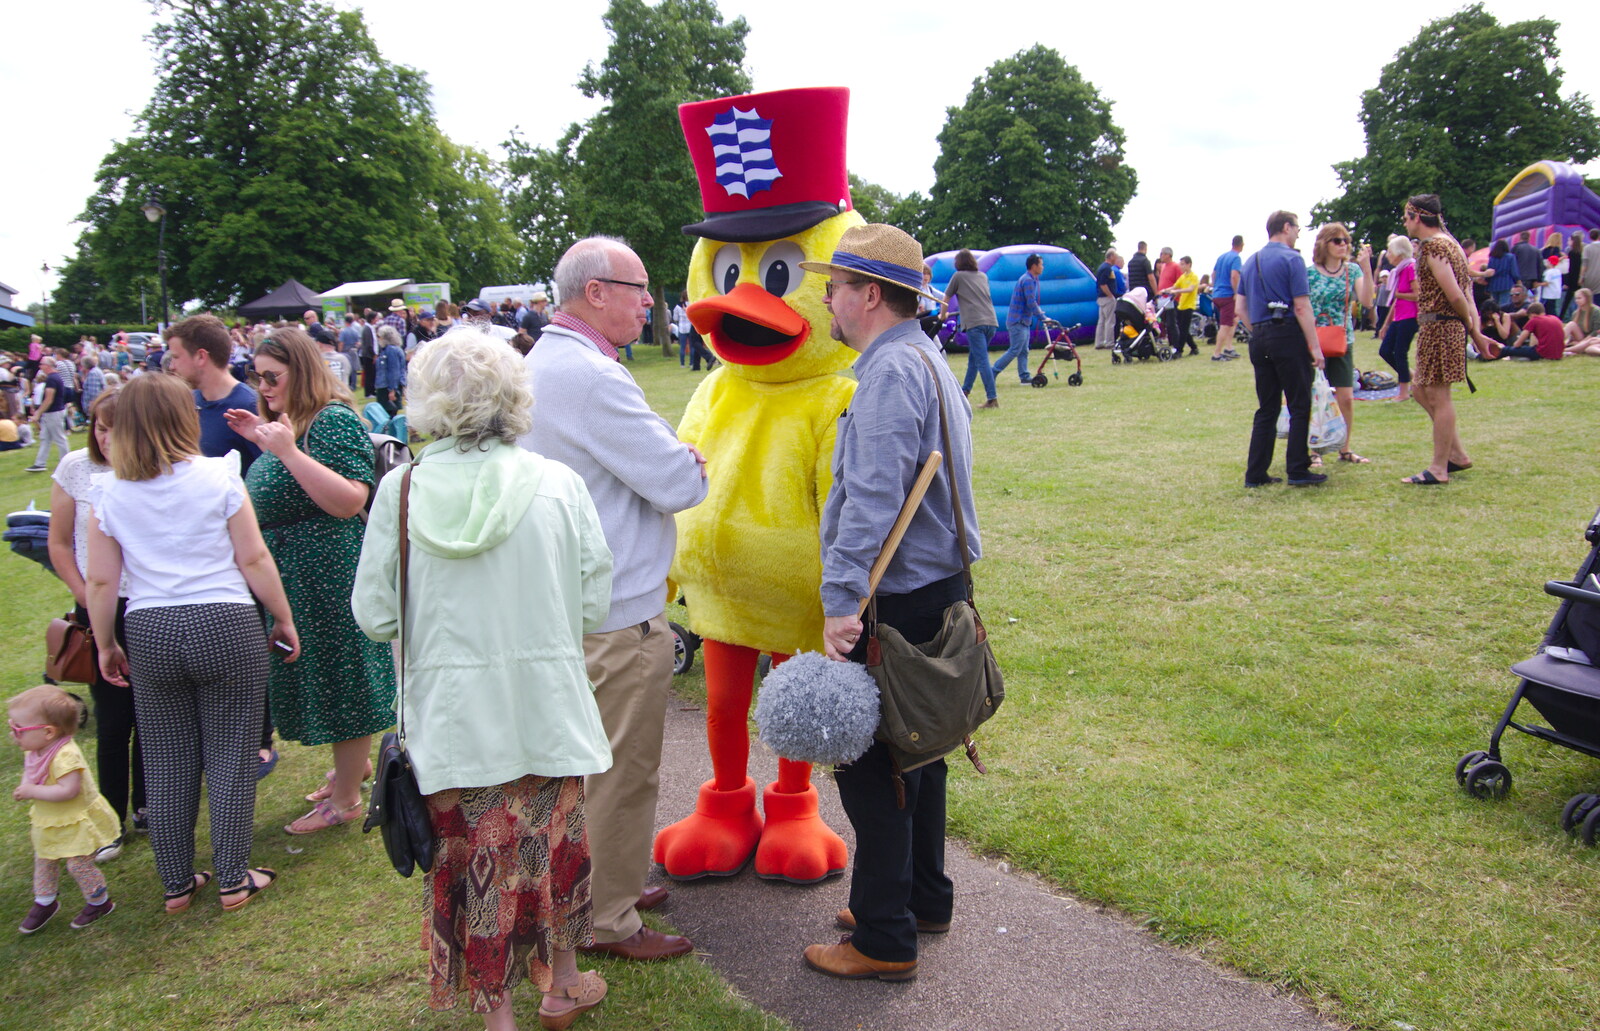 Dinsdale works the crowds from The Diss Carnival 2019, Diss, Norfolk - 9th June 2019